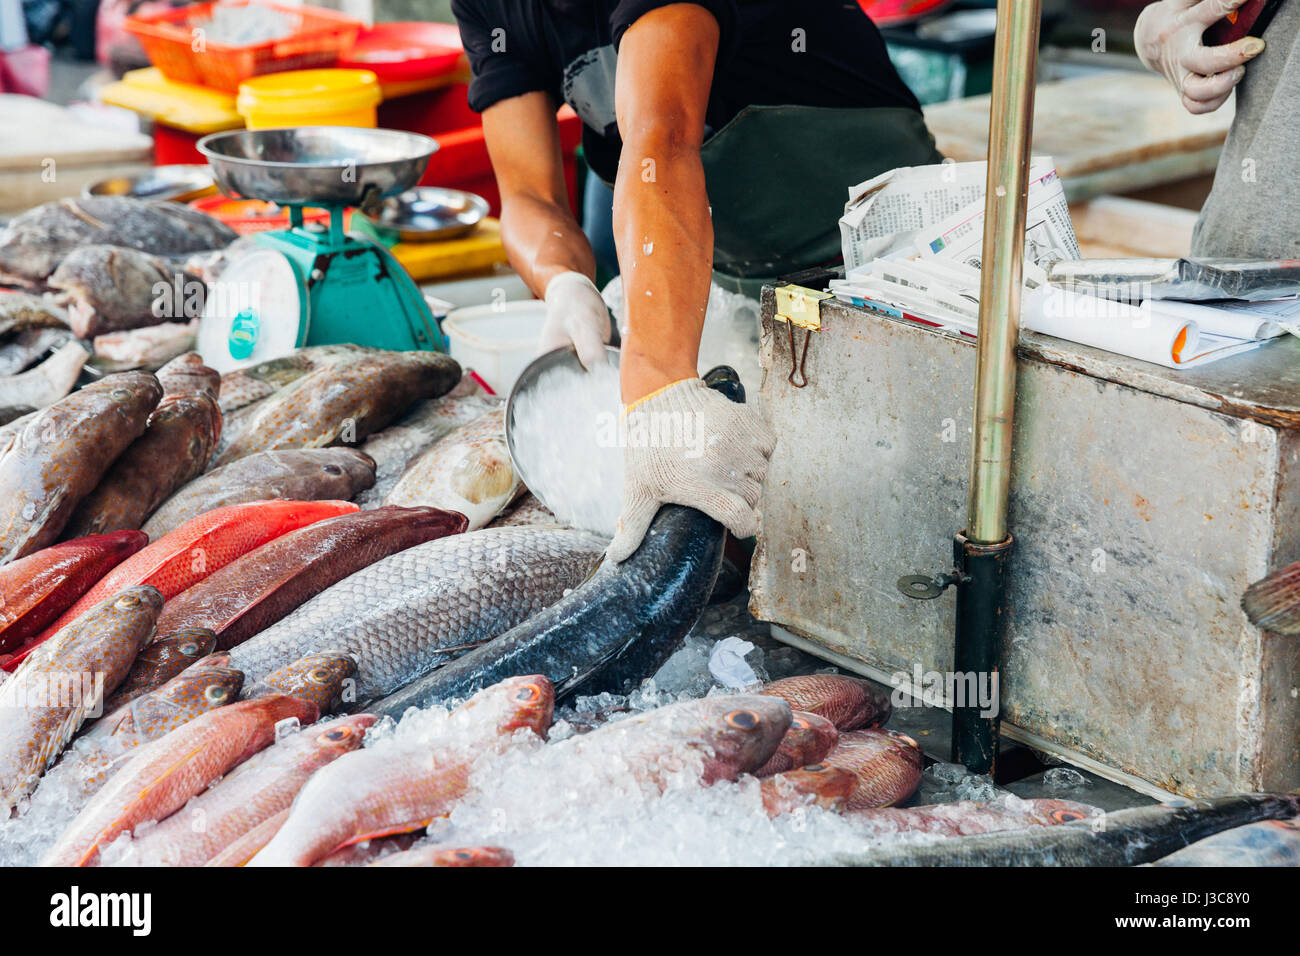 GEORGE TOWN, MALAYSIA - MARCH 23: Man prepare fish for sale at the wet market of Penang on March 23, 2016 in George Town, Malaysia. Stock Photo